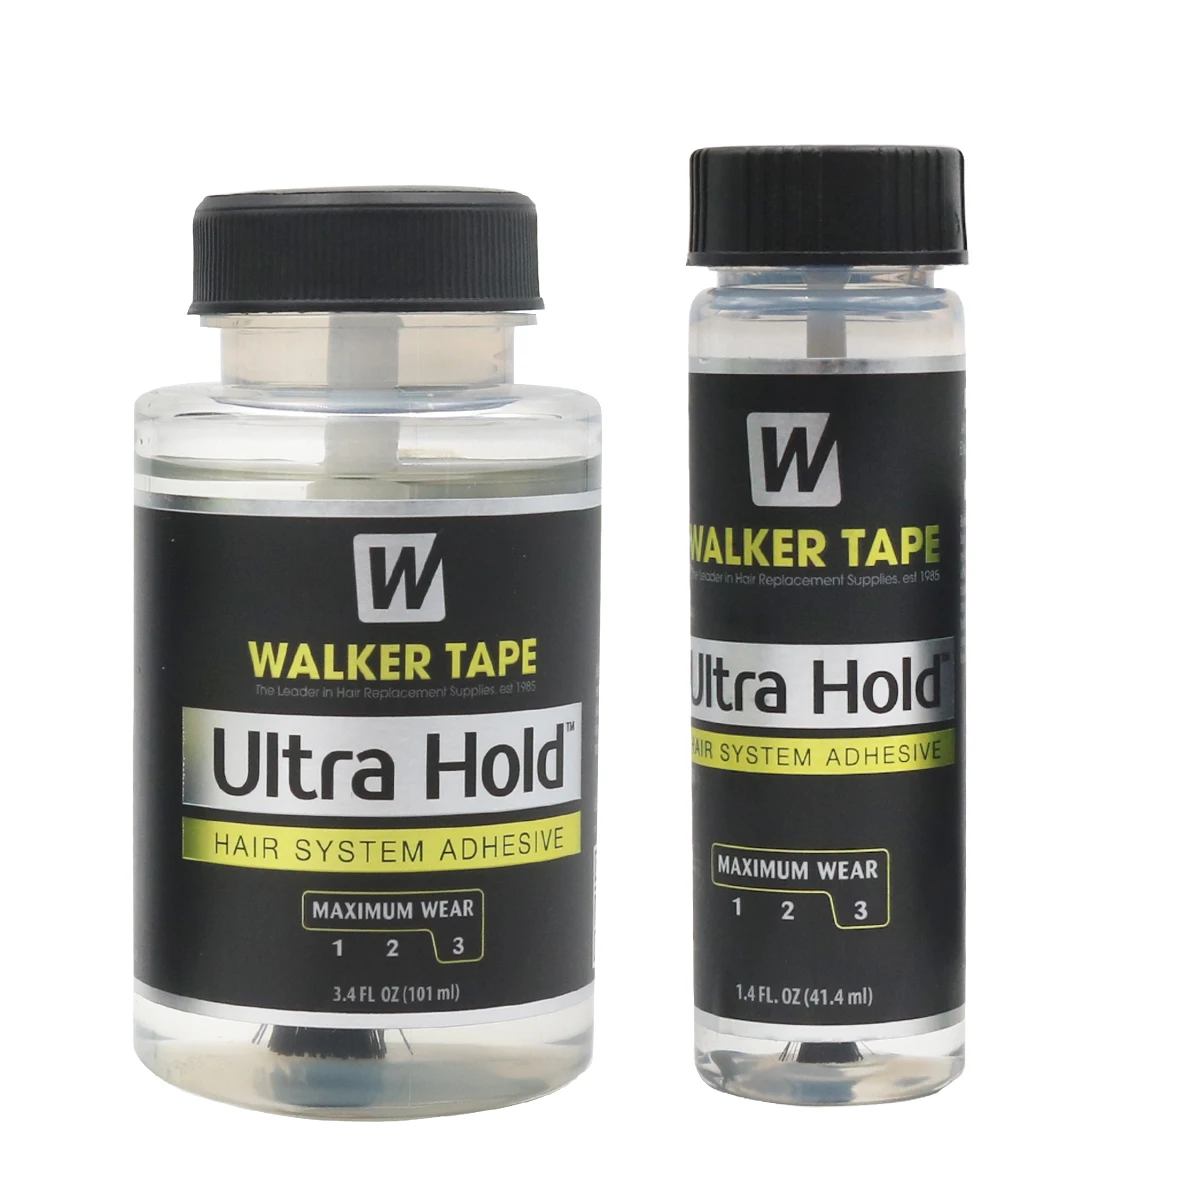 toilet Mand Misverstand Walker Tape Ultra Hold Hair System Adhesive 1.4fl.oz/bottle Lace Wig Glue  With Brush - Buy Walker Ultra Hold Glue,Ultra Hold Adhesive Hairpiece Glue, Hair Replacement System Wig Glue Product on Alibaba.com